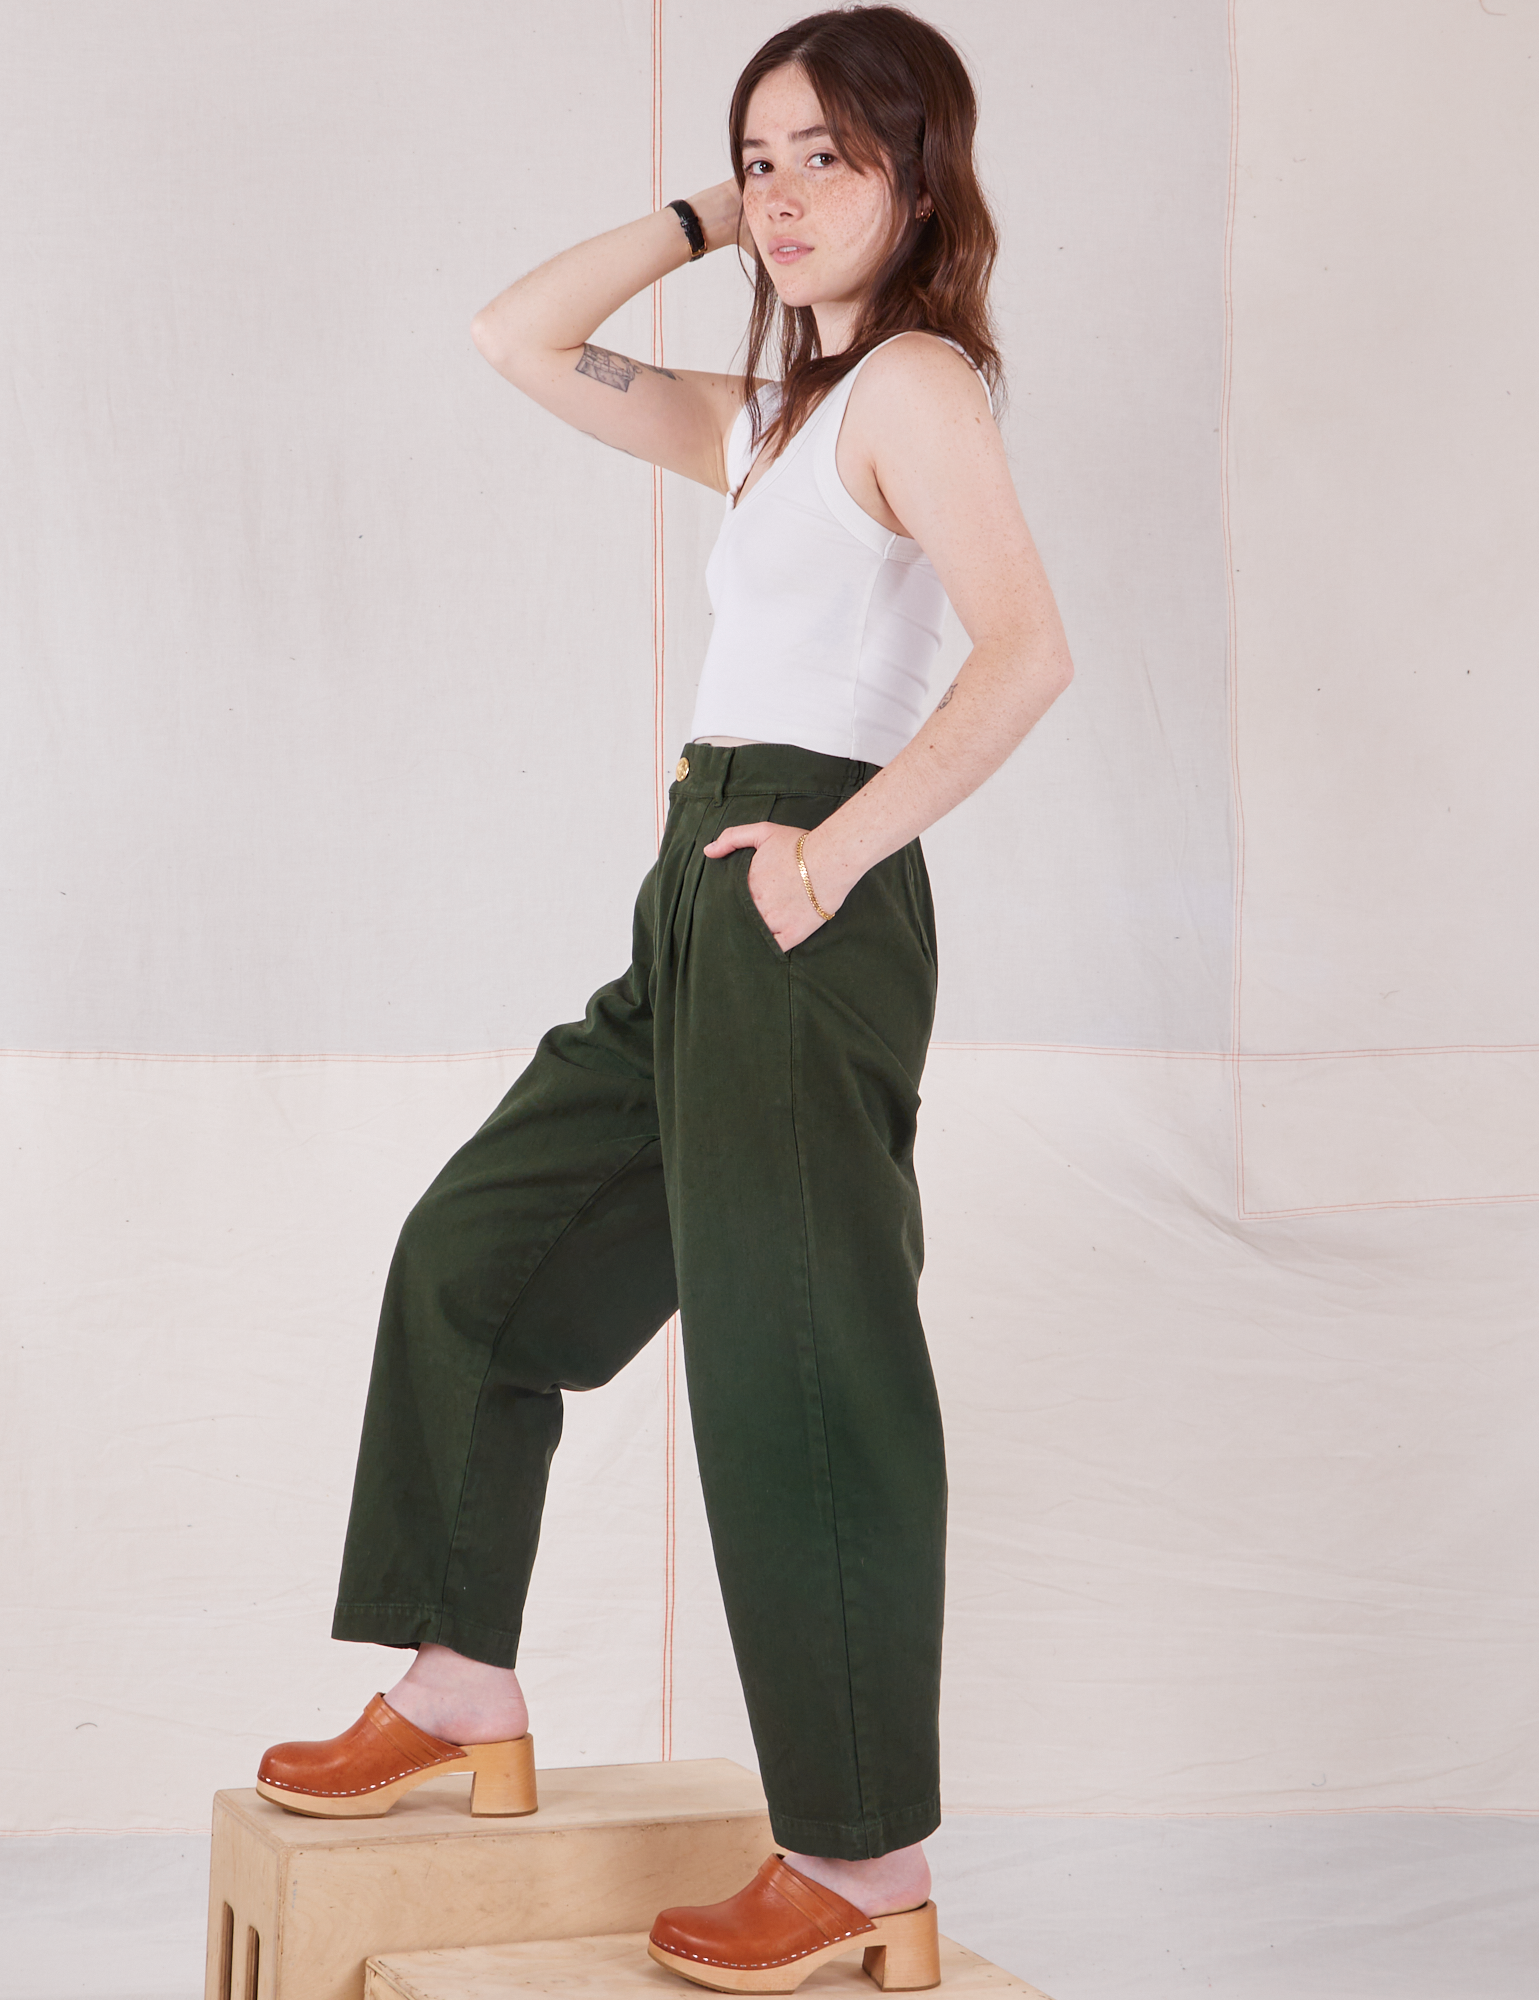 Side view of Heavyweight Trousers in Swamp Green and Cropped Tank Top in vintage tee off-white on Hana